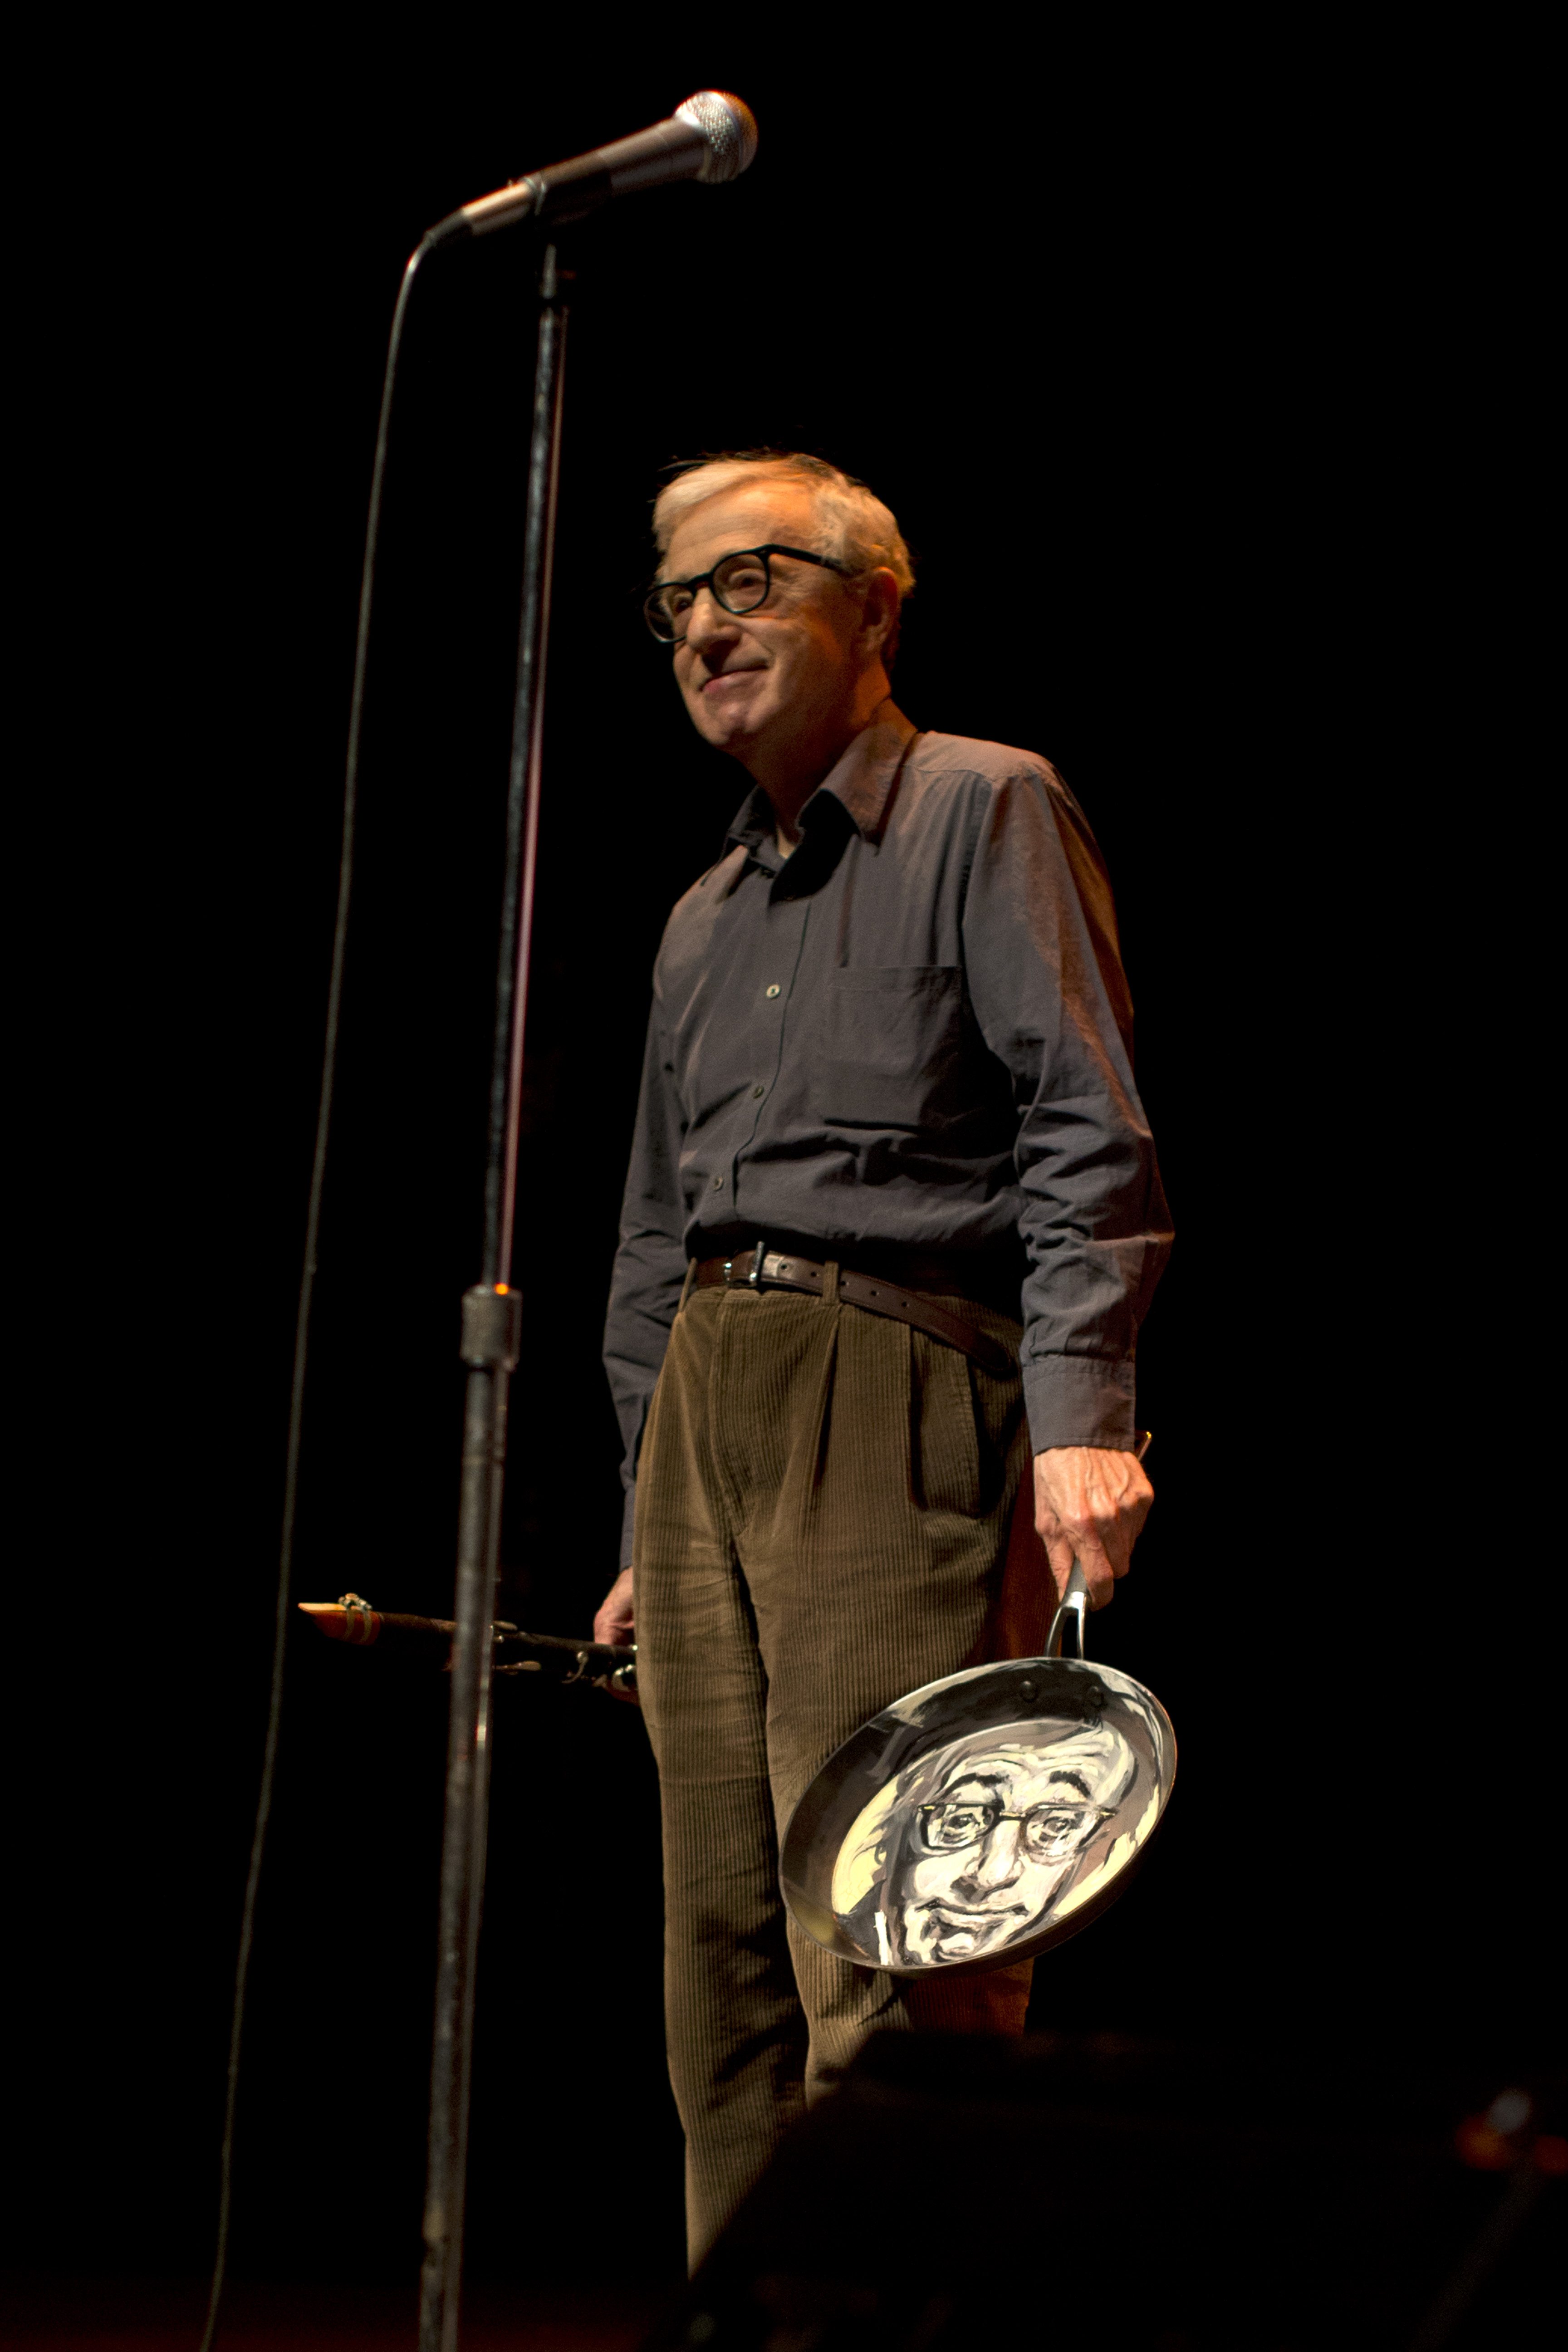 Woody Allen receives a portrait of himself on a frying pan at his Jazz concert at Royce Hall in Los Angeles.